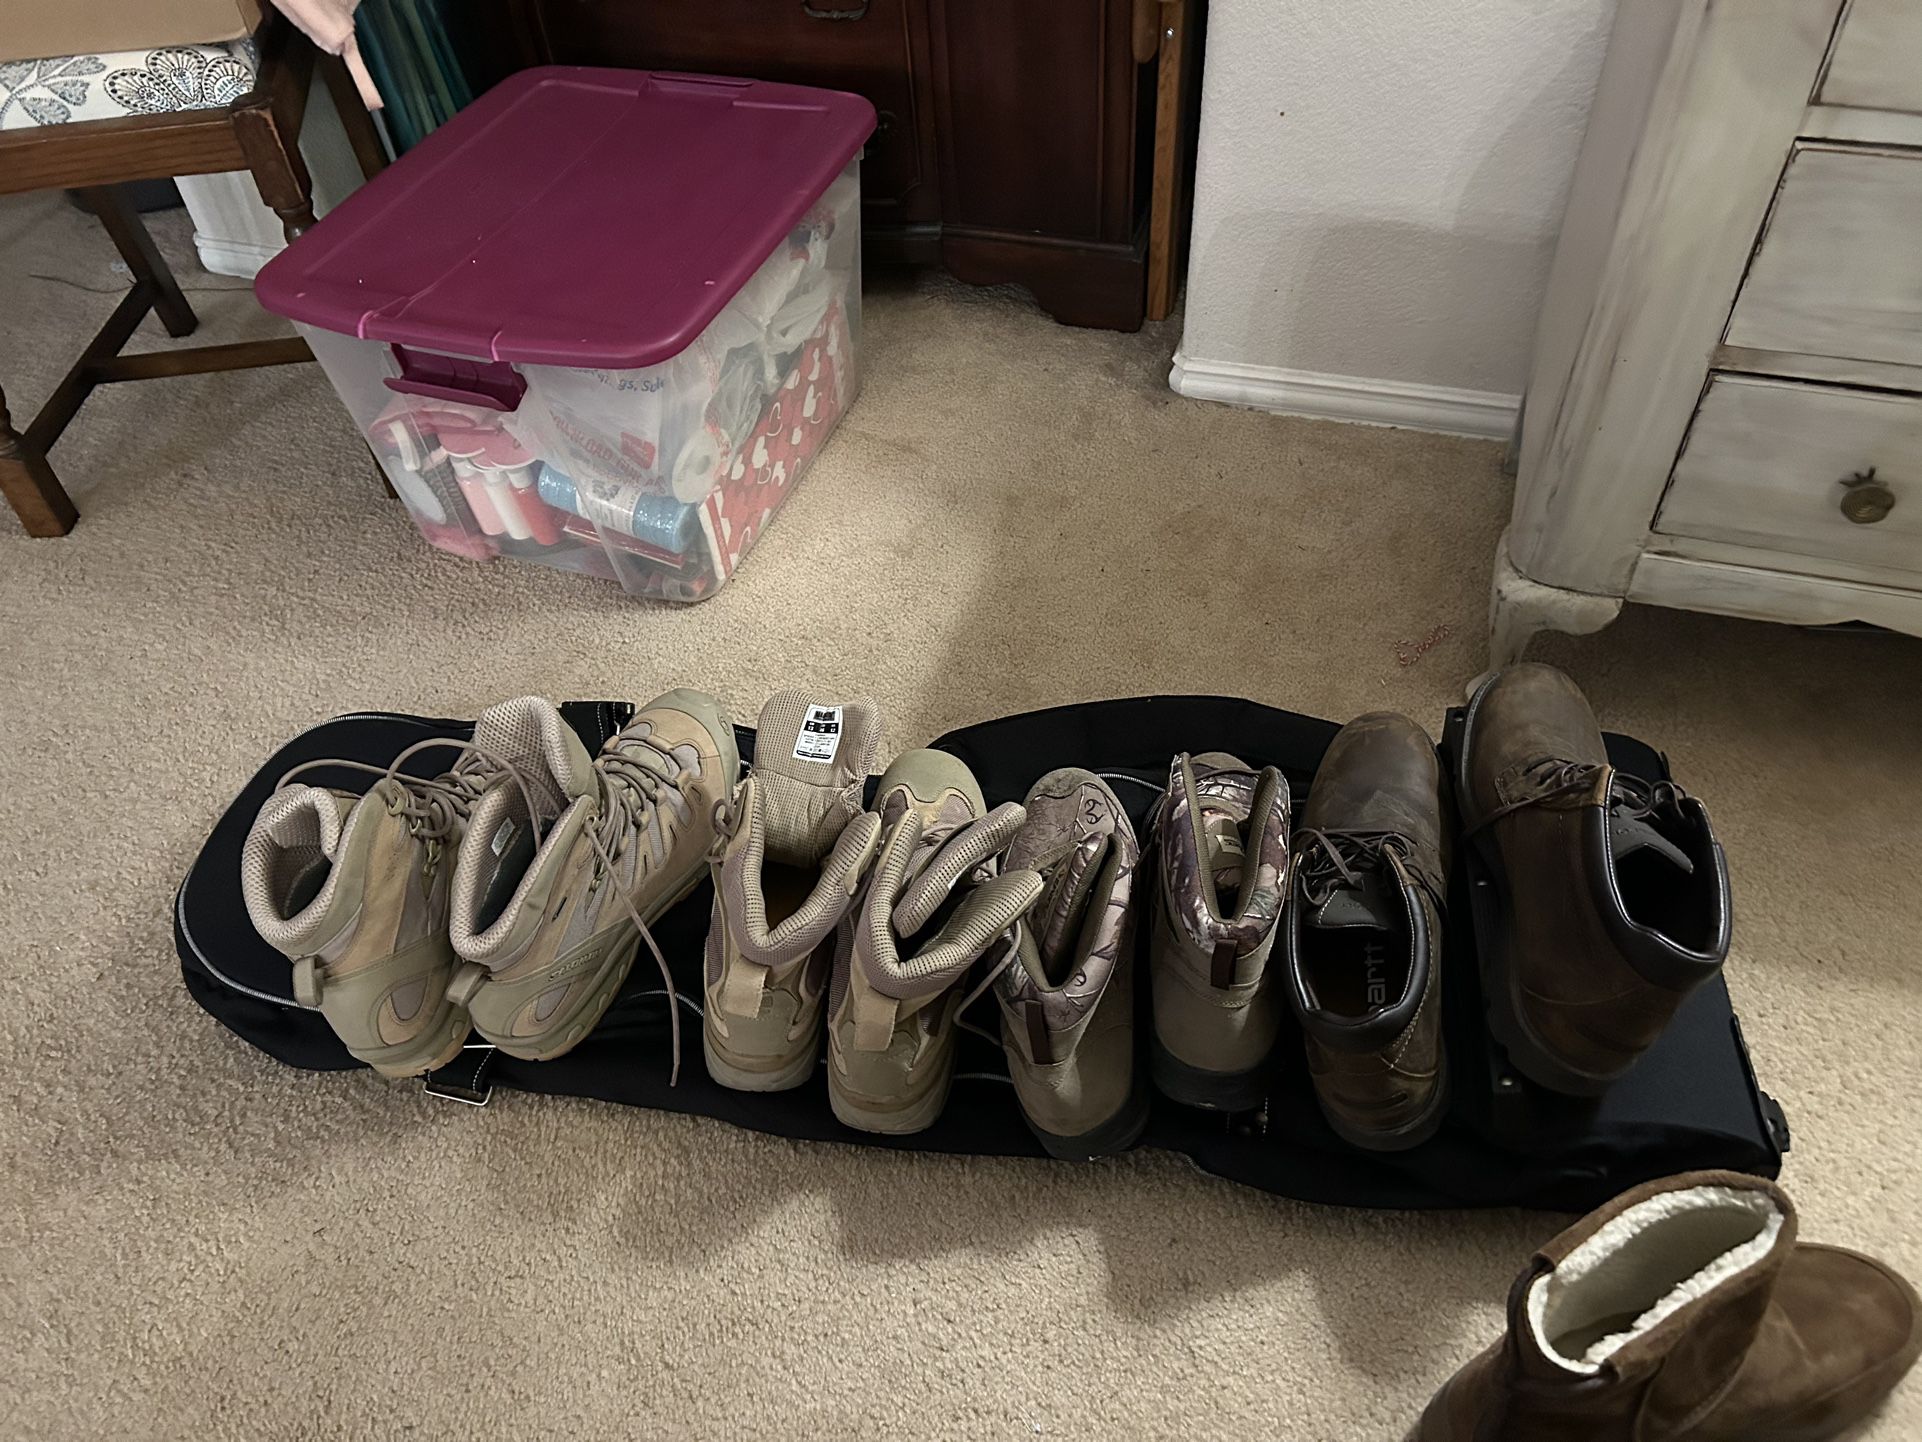 Size 14 Men’s Work Boots And Golf Bag